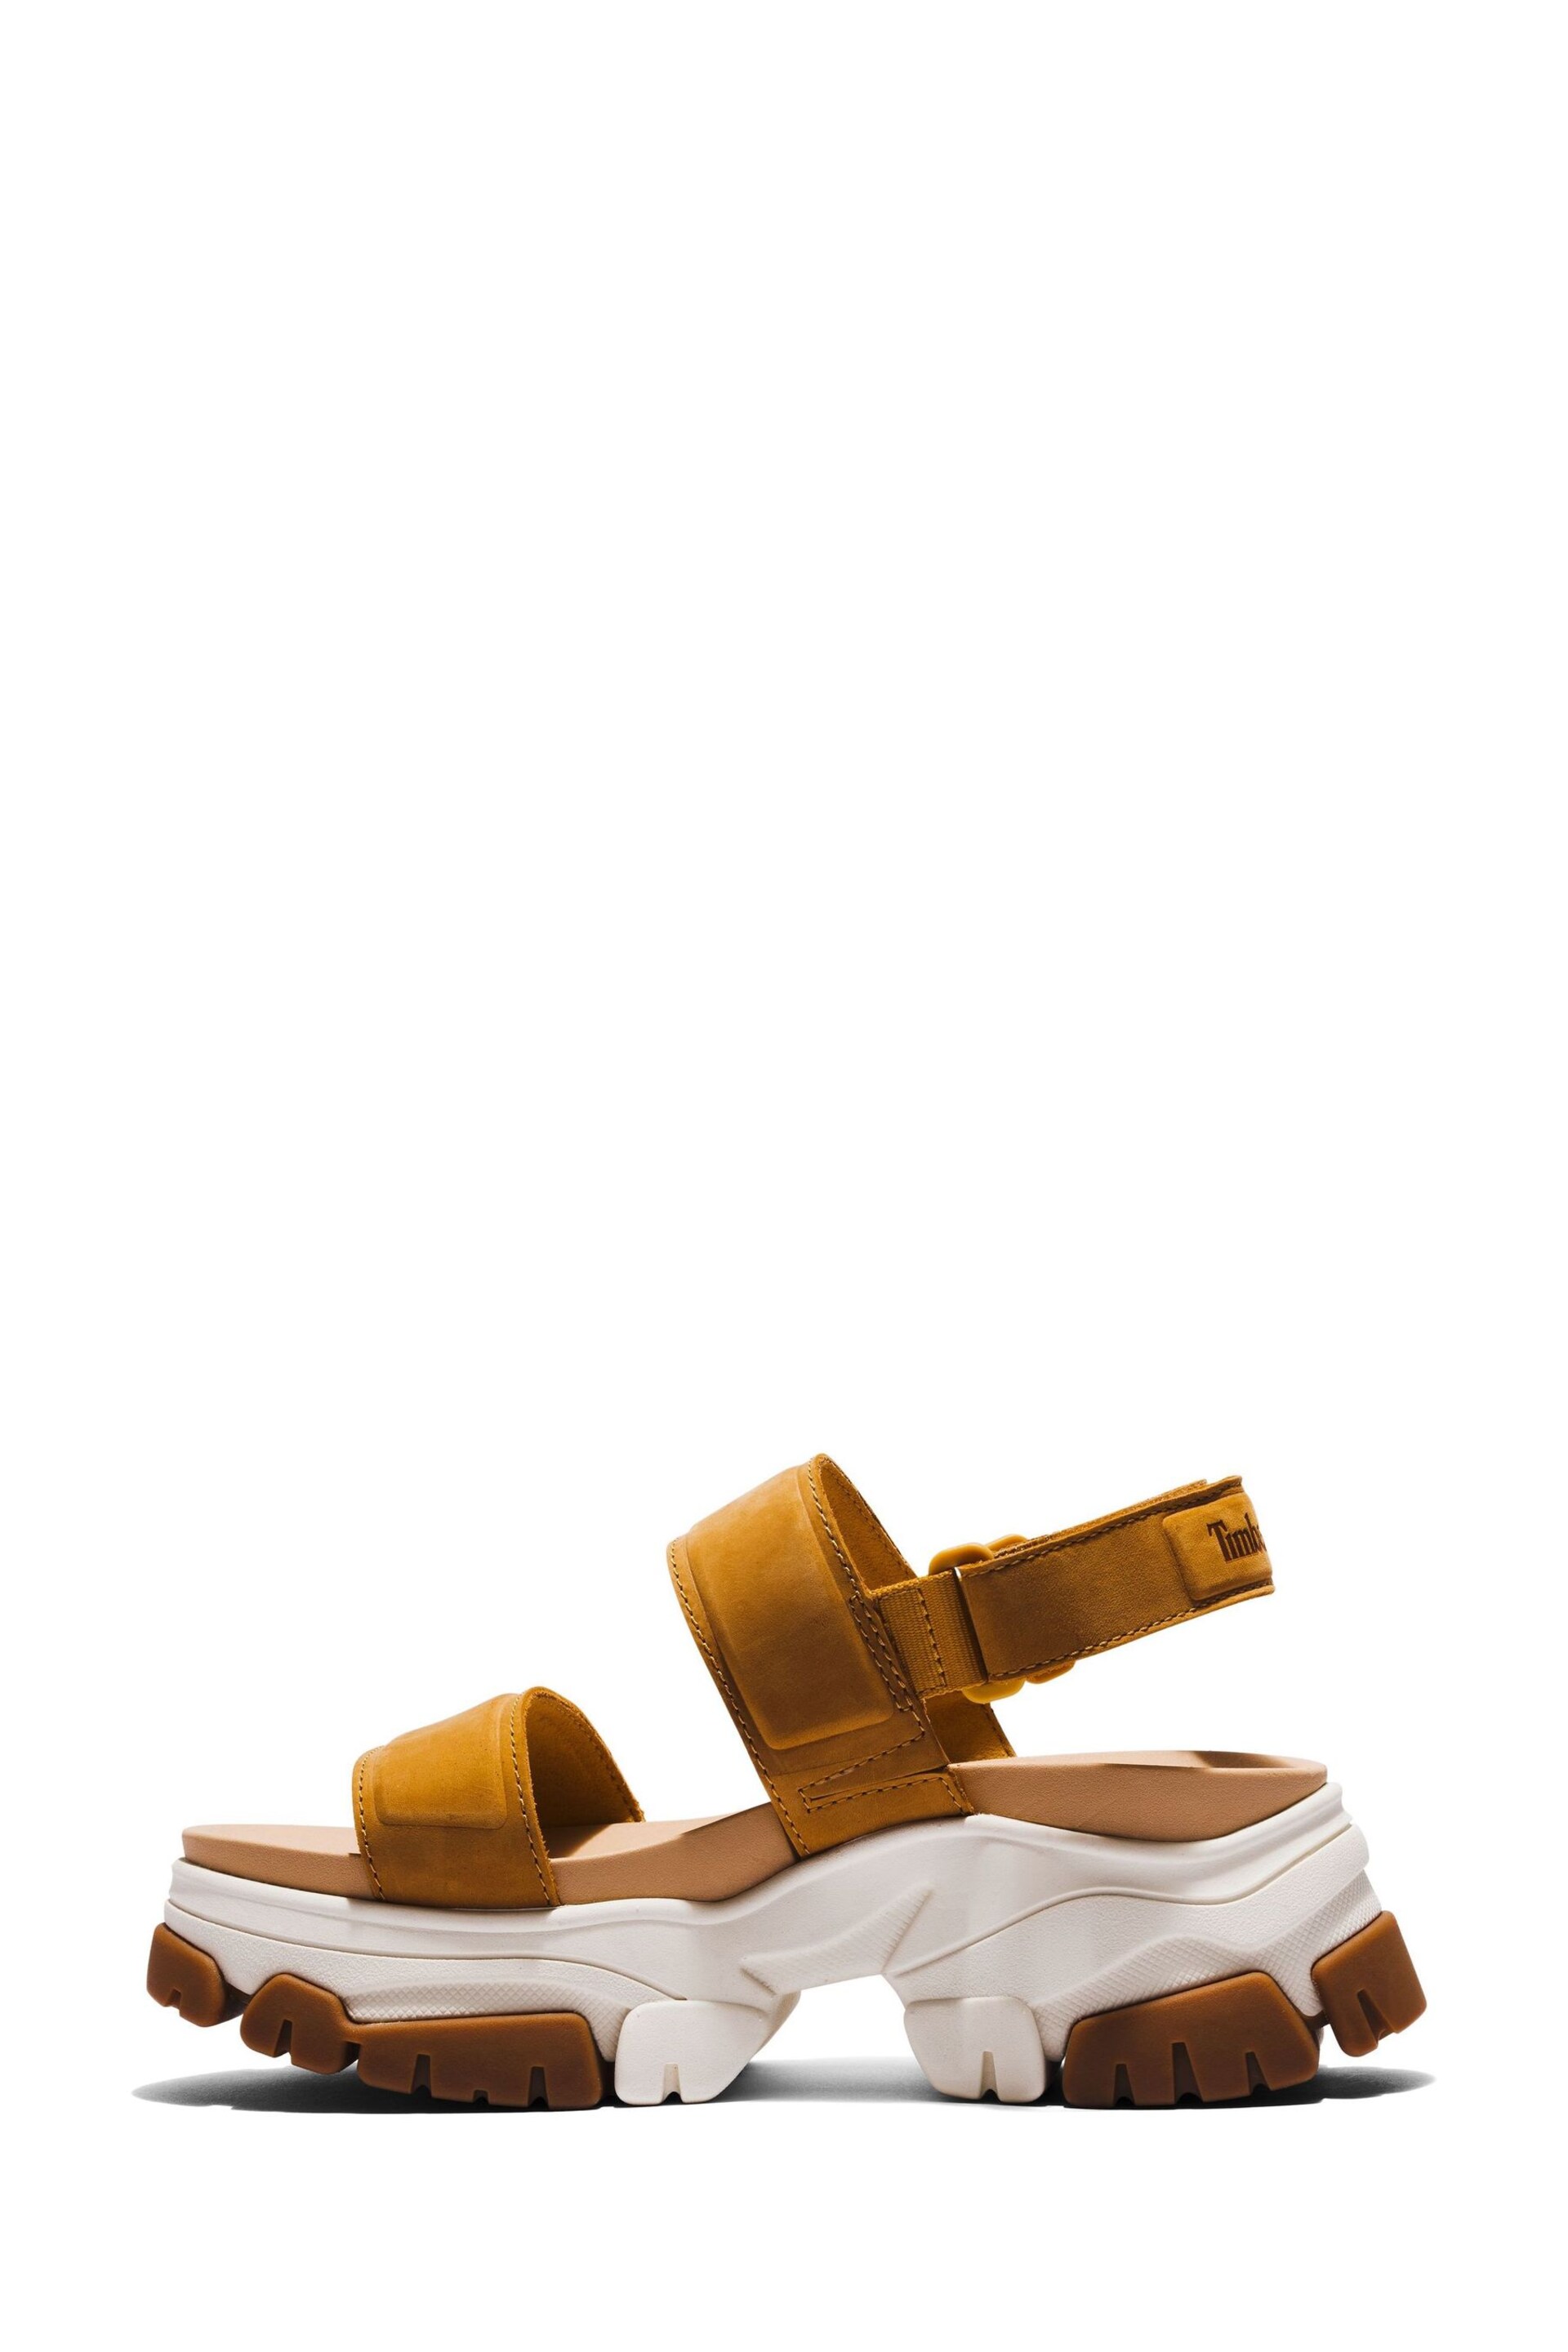 Timberland Yellow Adley Way Sandals - Image 4 of 9